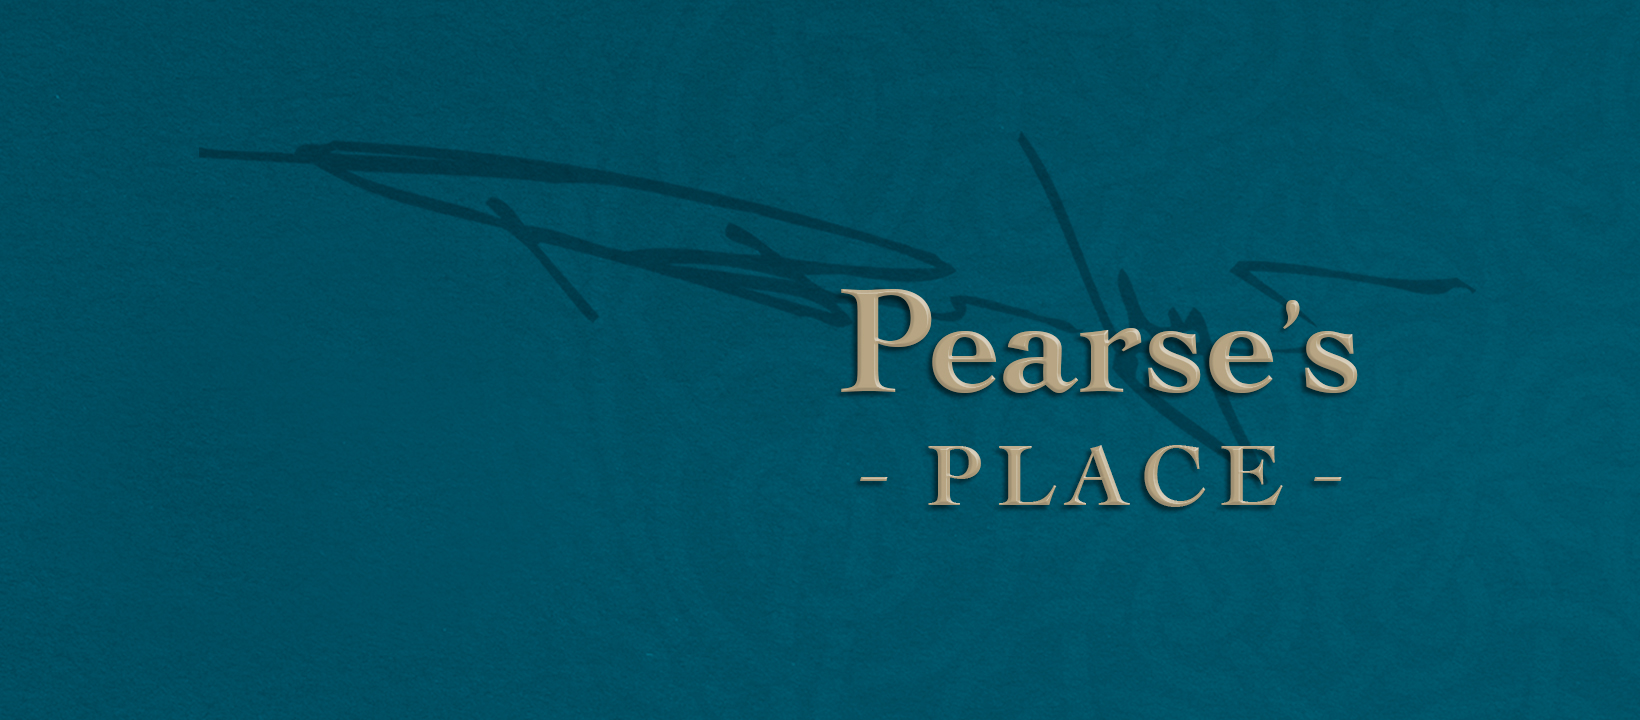 Pearses Place Sign.jpg